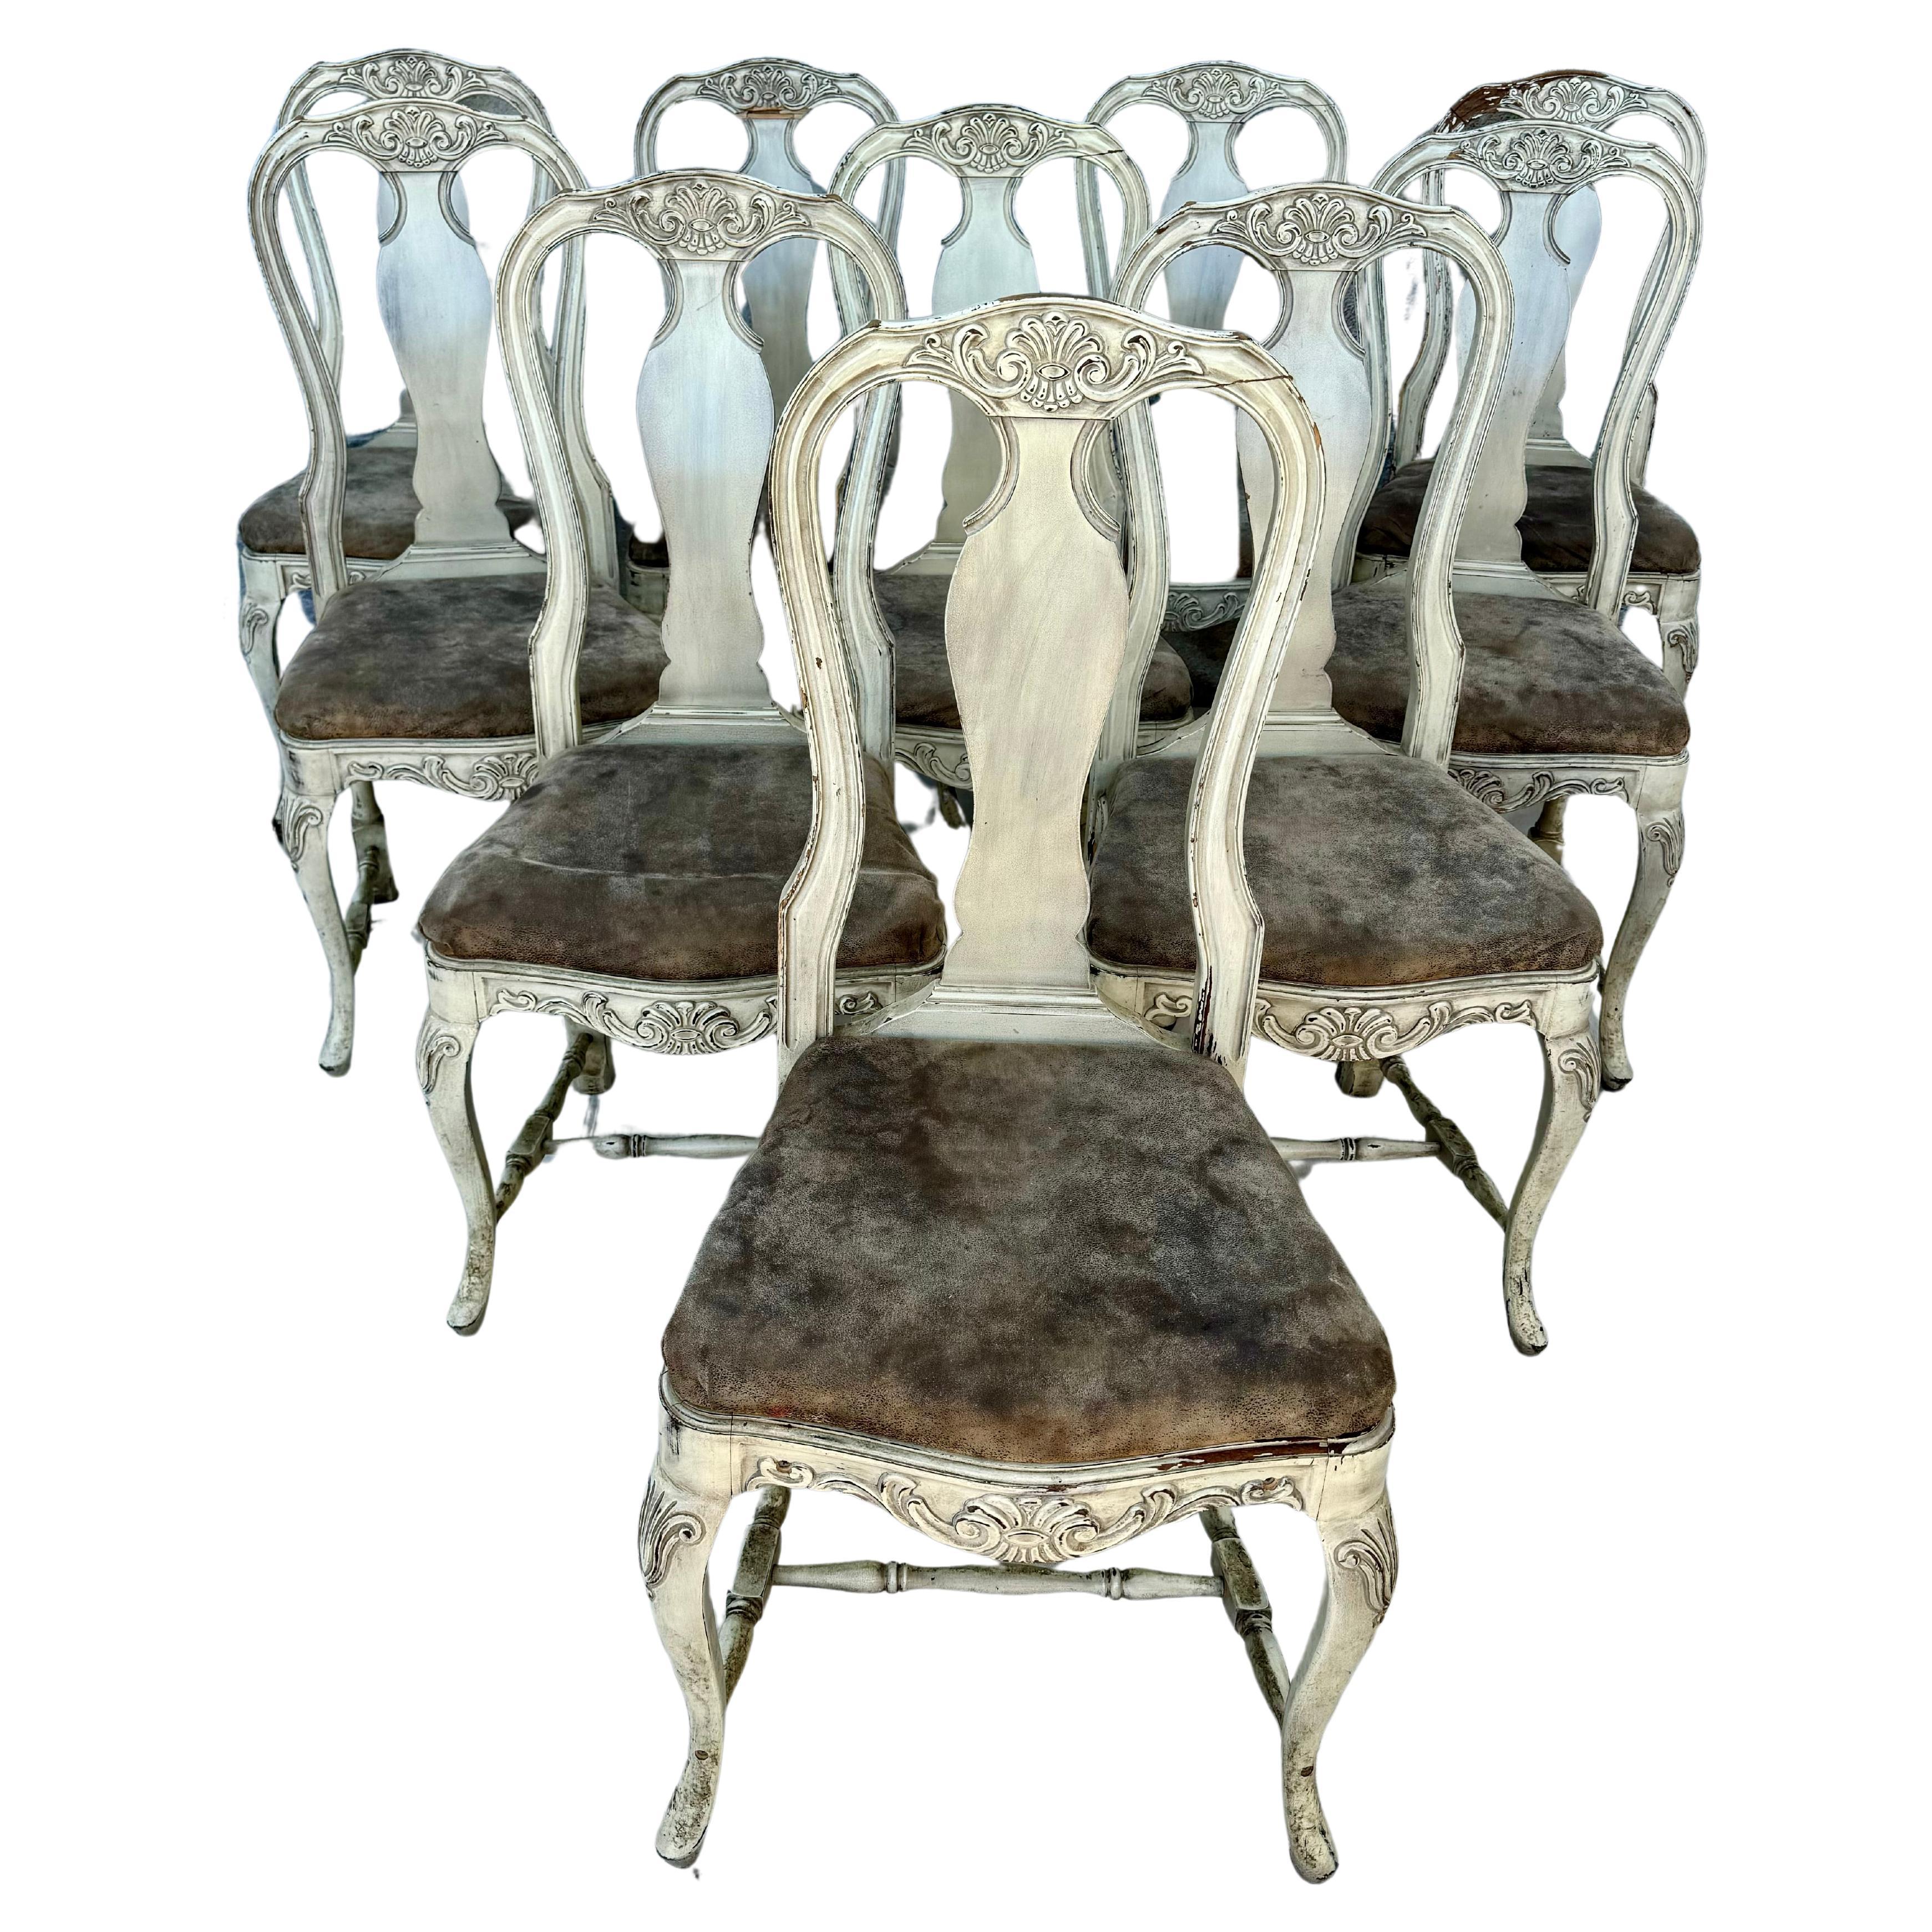 Fine set of ten (10) mid 20th century Swedish Rococo style dining chairs. Lovely chairs feature ornate carved details, shapely curved backs and cabriolet legs, with seats upholstered in brown leather fabric. Each chair is supported by an H stretcher.